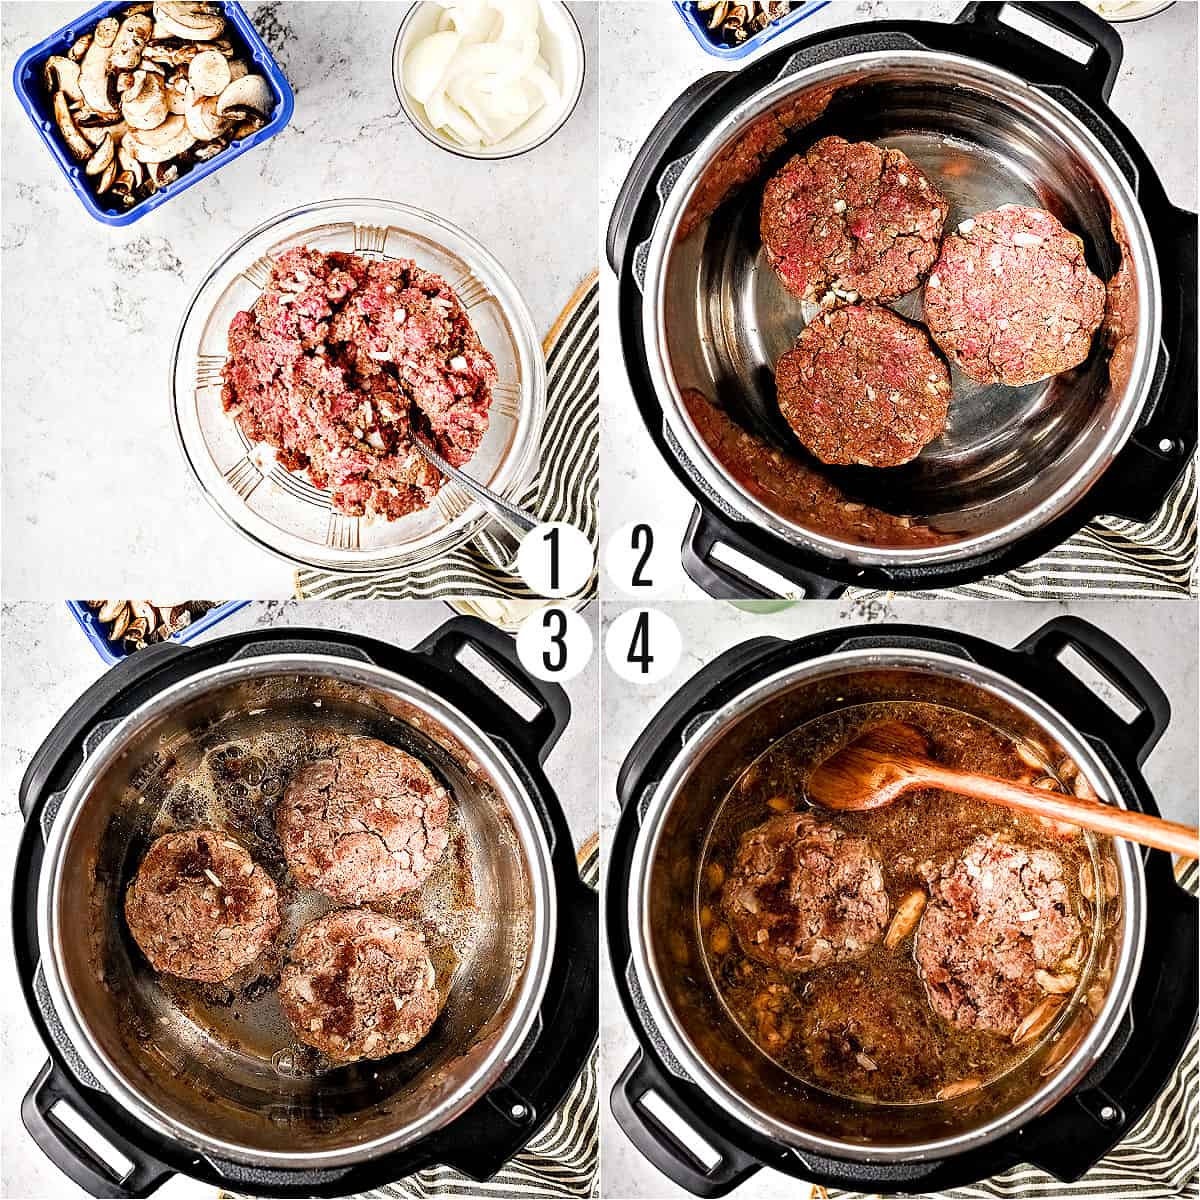 Step by step photos showing how to make salisbury steak in the pressure cooker.